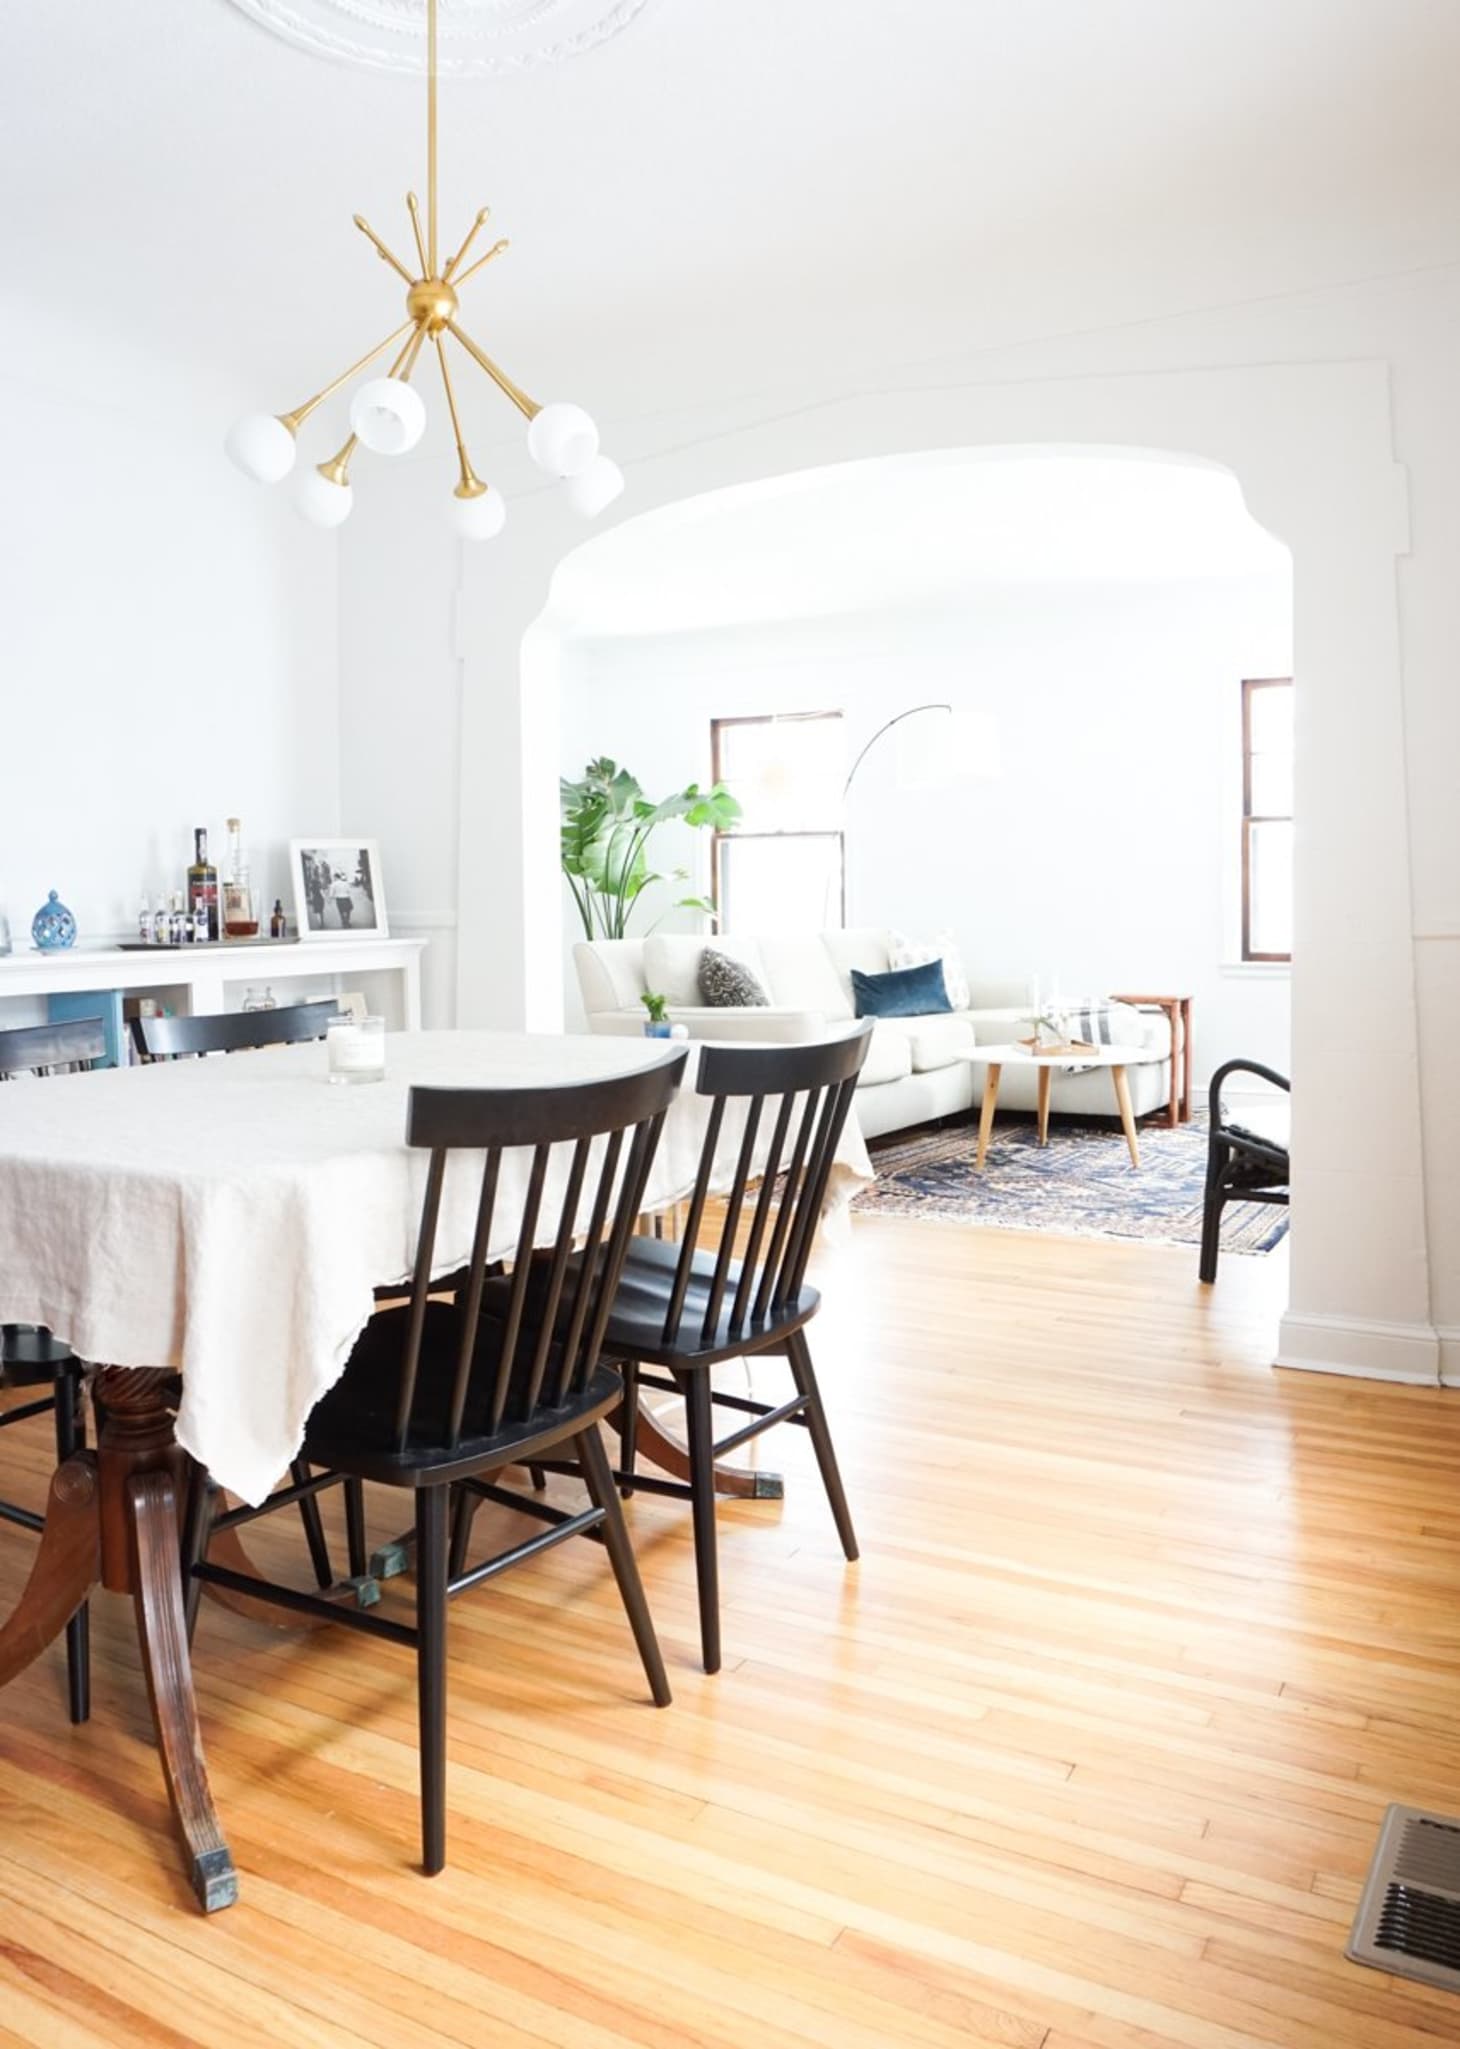 How High Should I Hang a Light Above the Dining Table? | Apartment Therapy